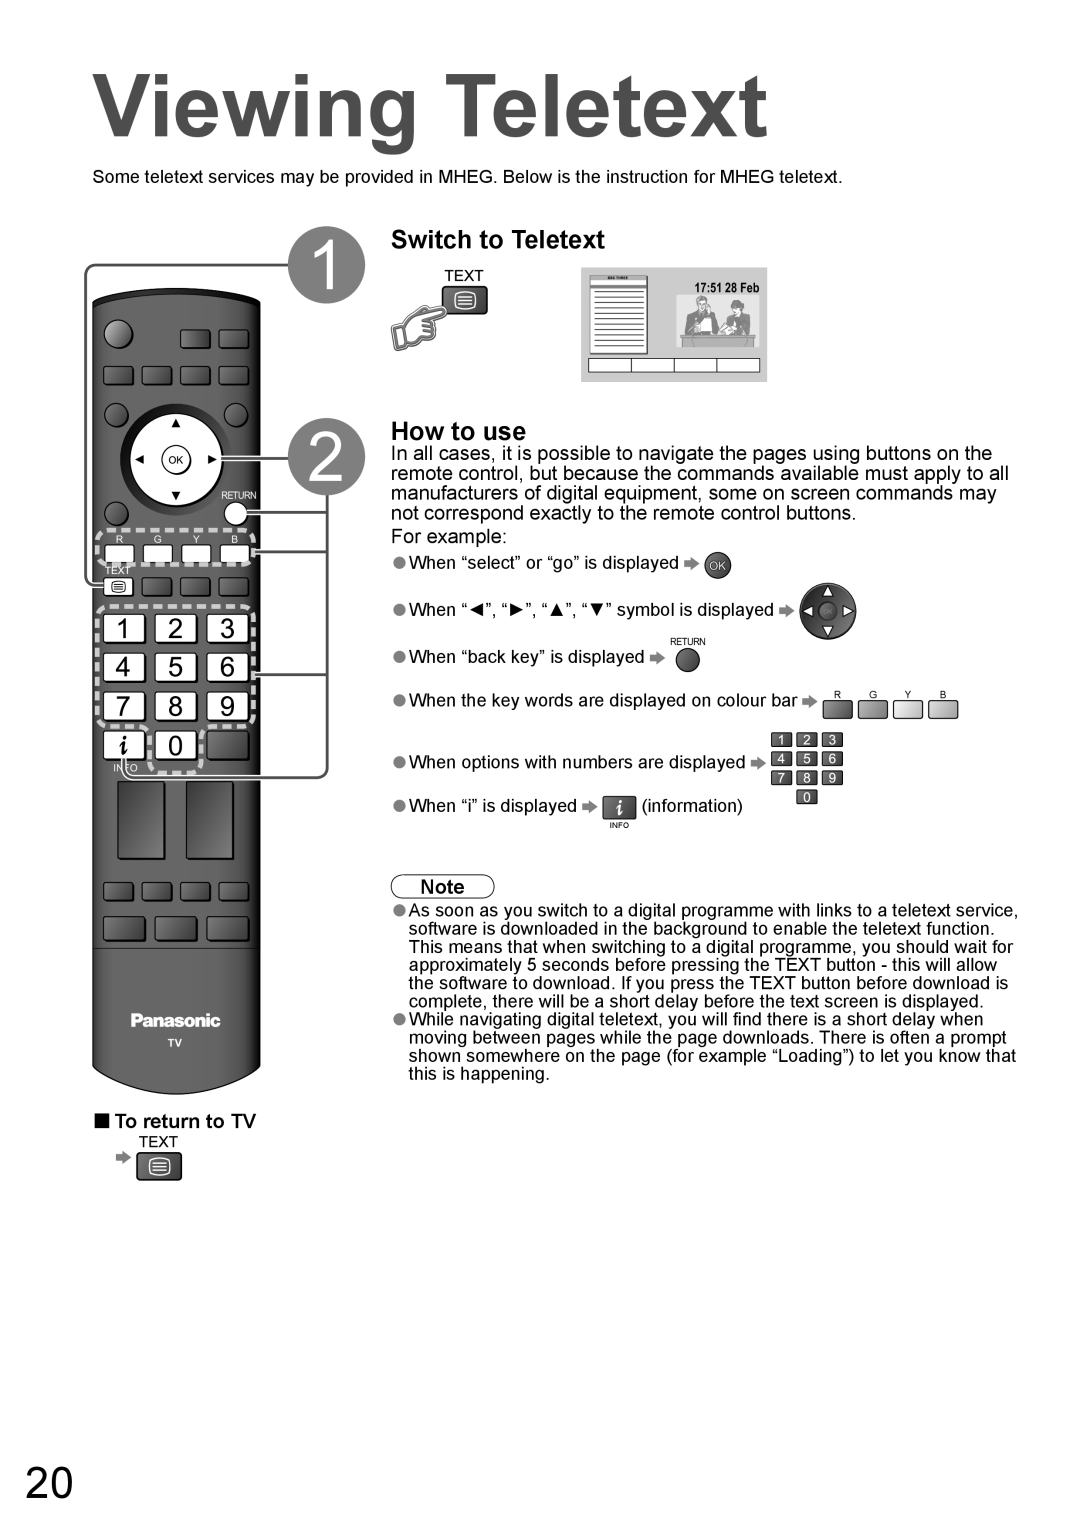 Panasonic TH-50PZ850AZ, TH-42PZ850AZ How to use, Viewing Teletext, Switch to Teletext, For example, To return to TV 